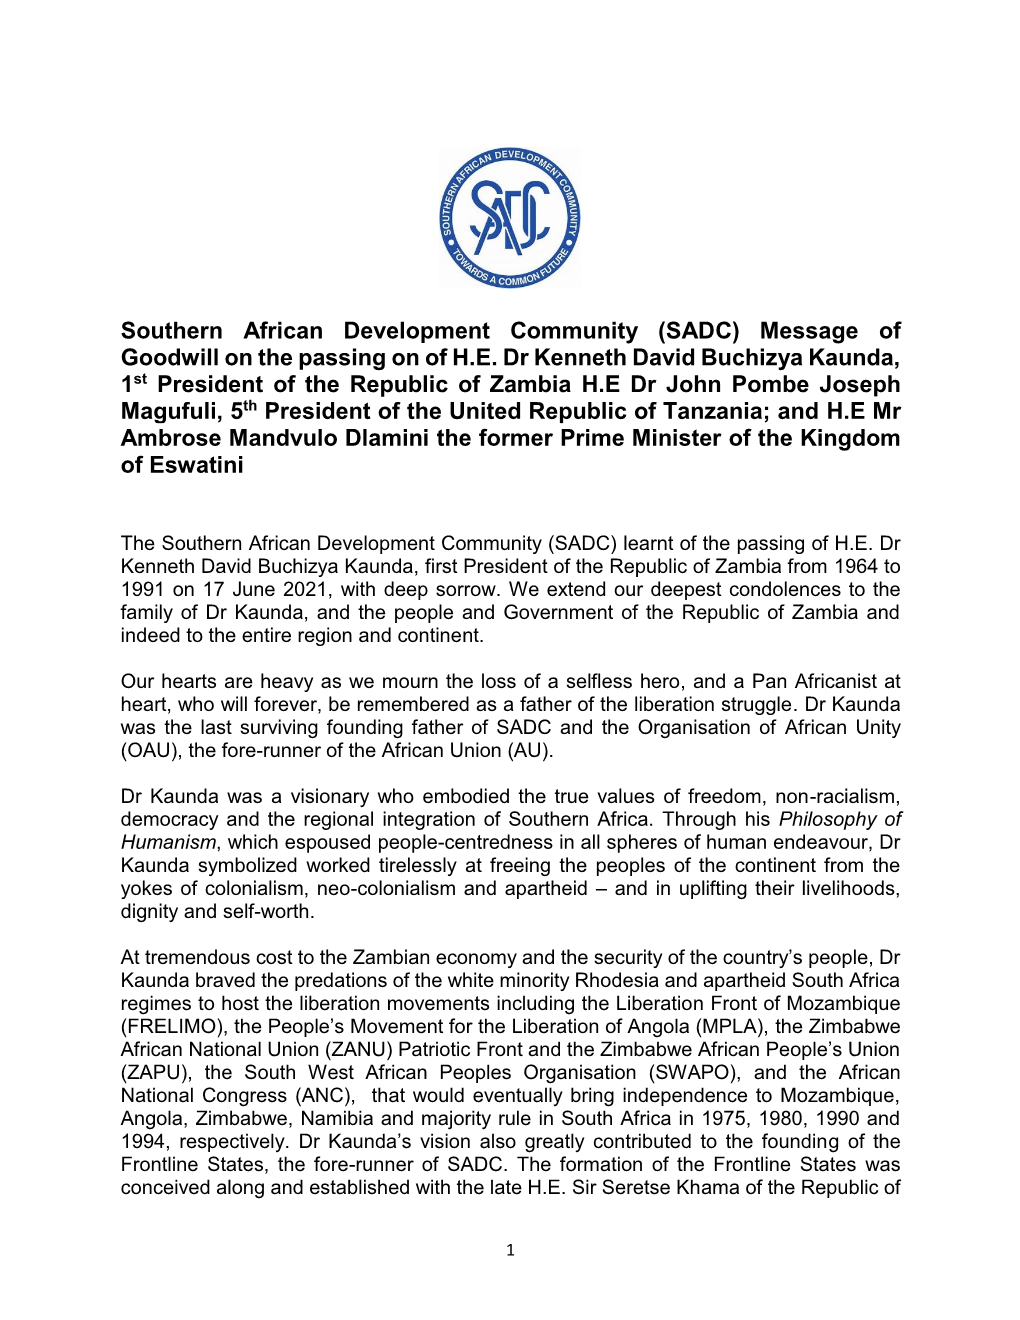 Southern African Development Community (SADC) Message of Goodwill on the Passing on of H.E. Dr Kenneth David Buchizya Kaunda, 1S